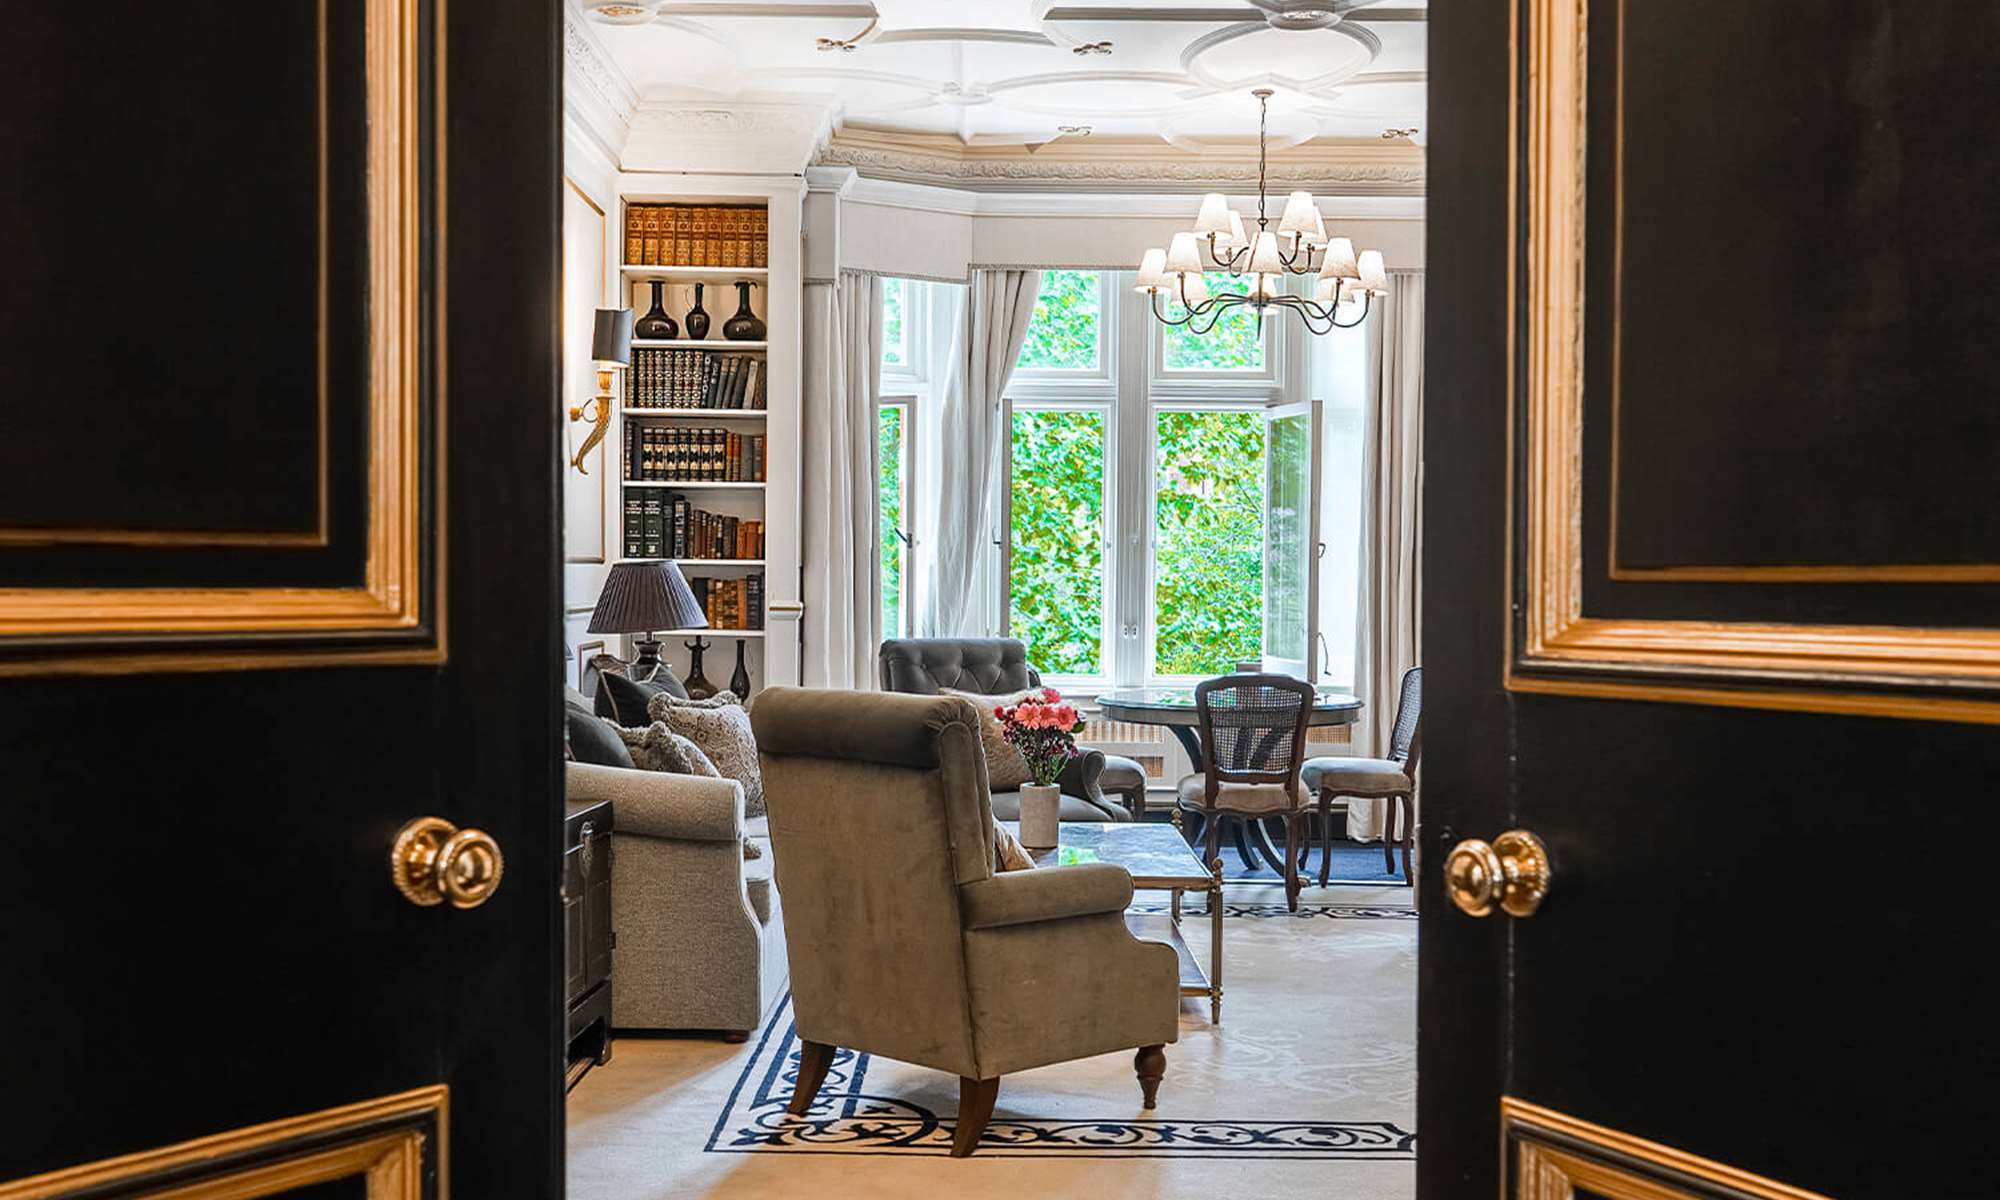 View from the door of the living room of the Sloane Suite at 11 Cadogan Gardens